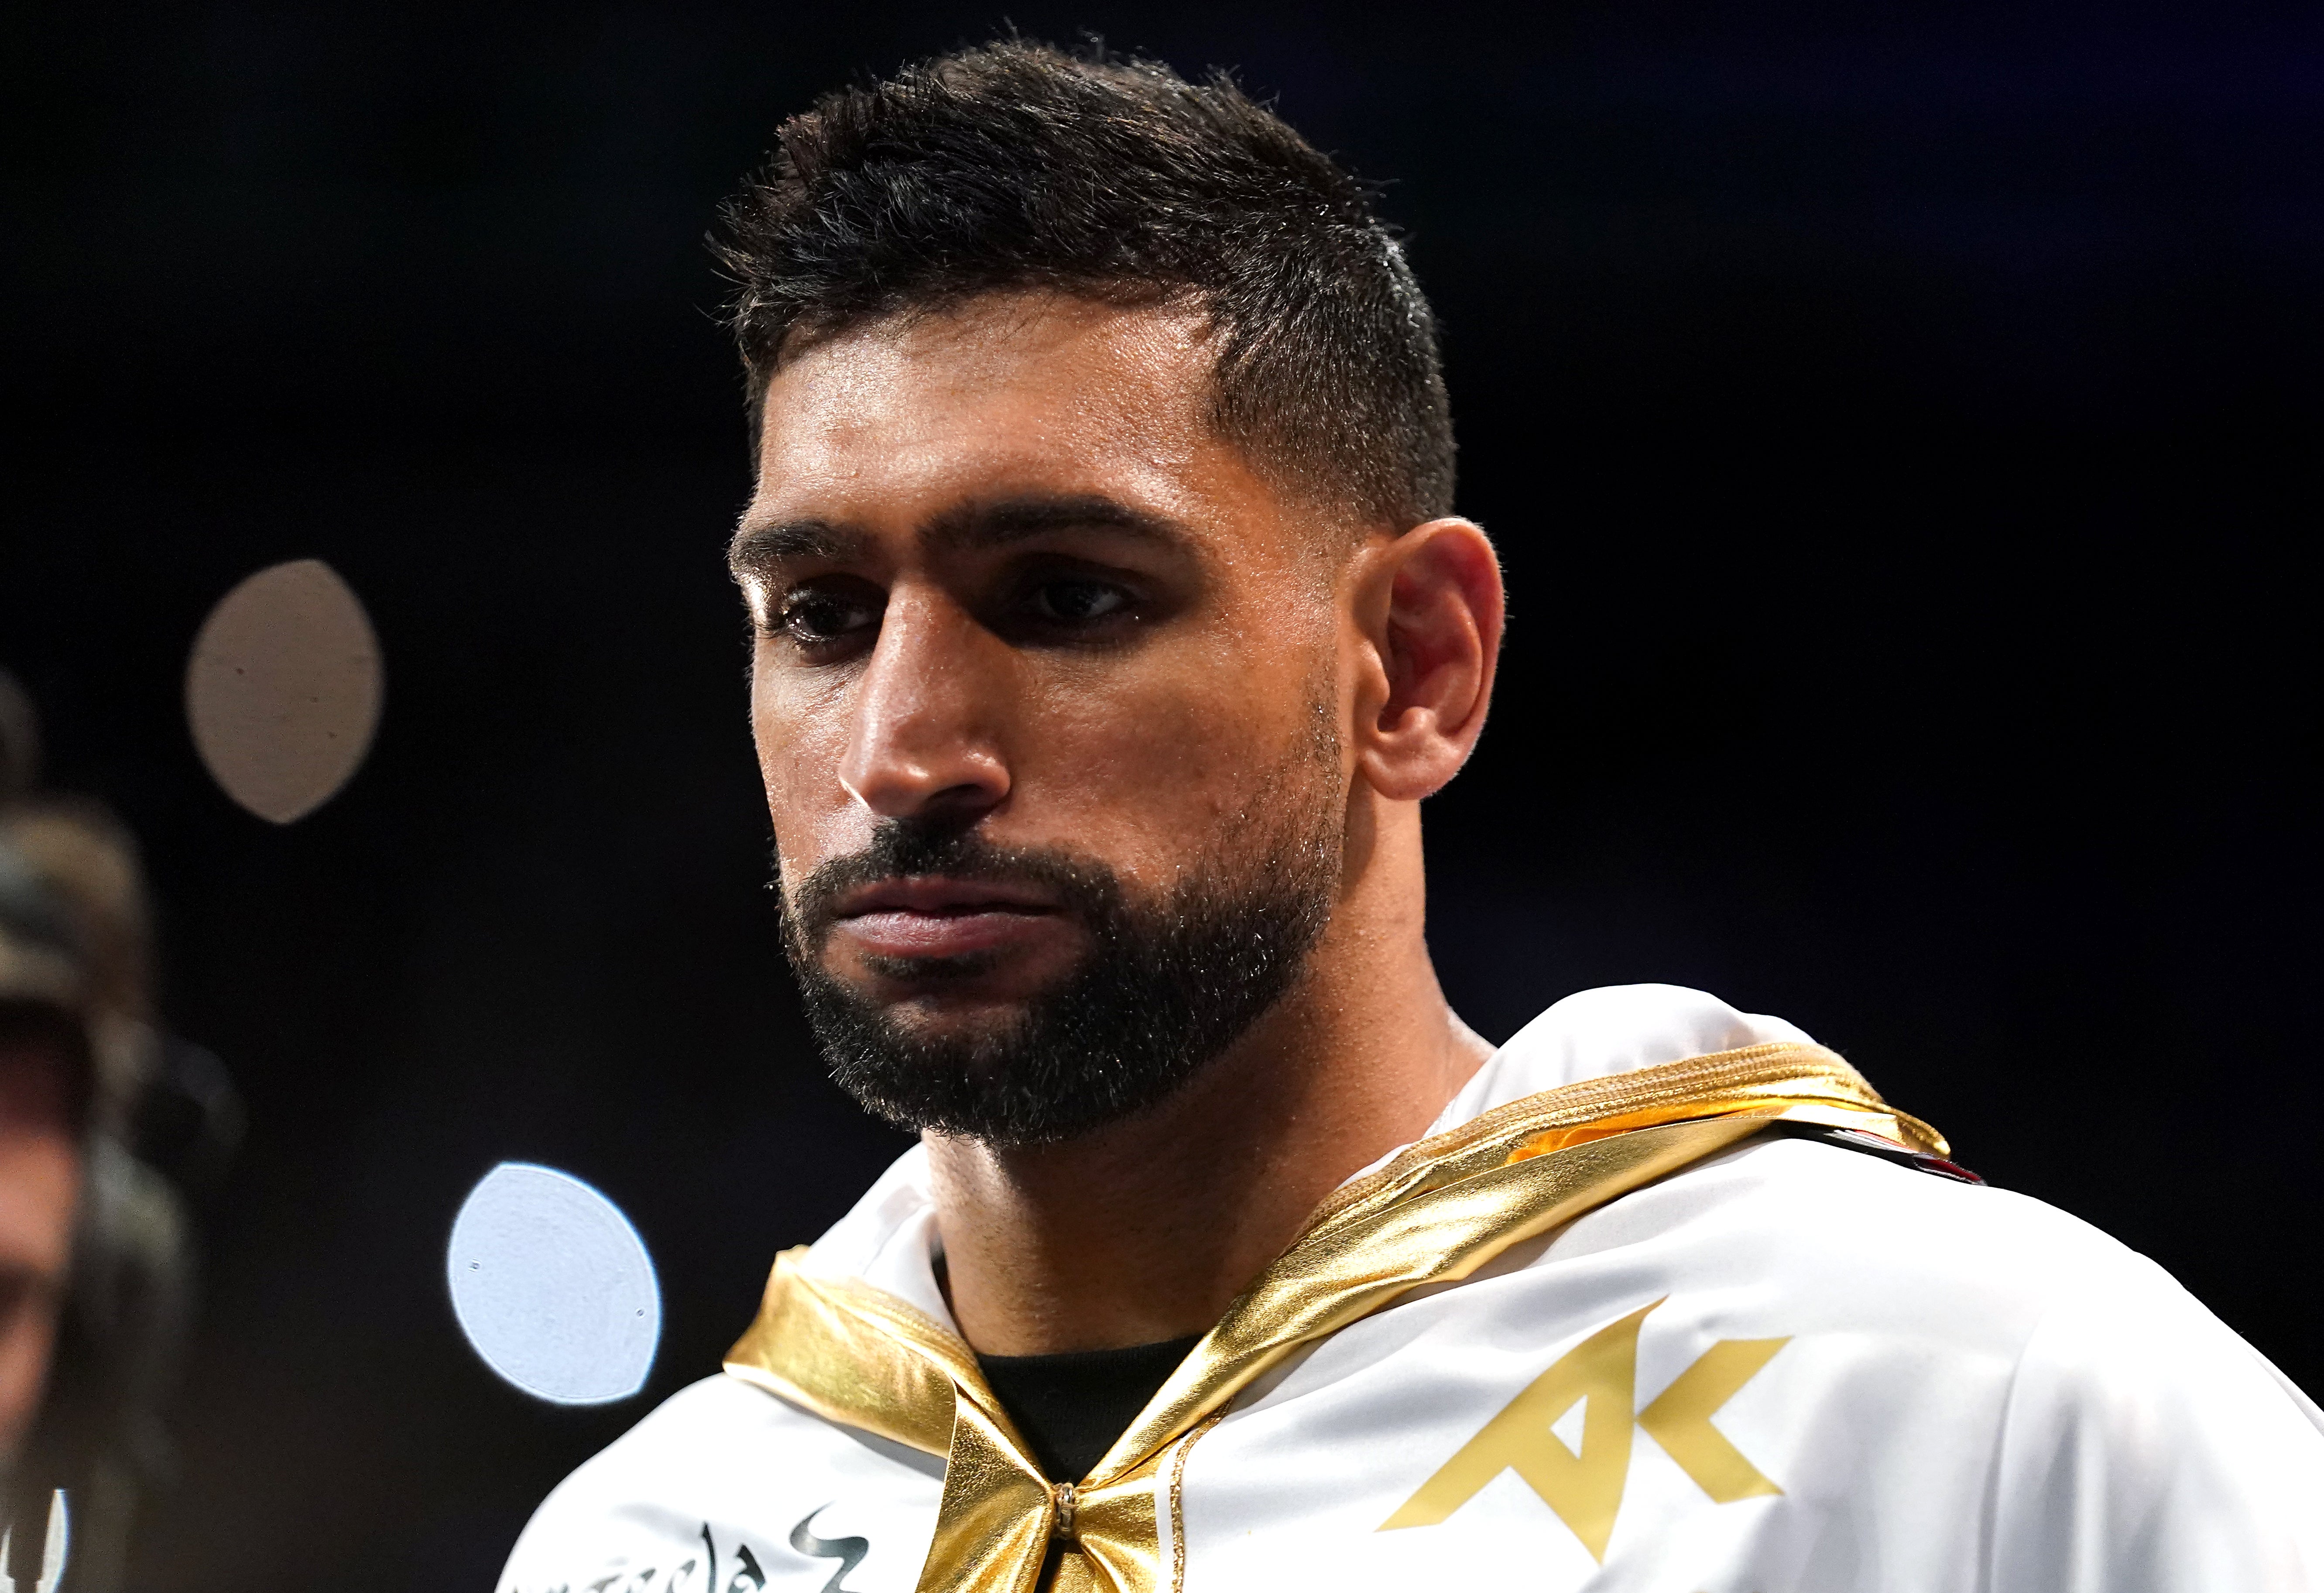 Amir Khan said he was with his wife at the time (Nick Potts/PA)